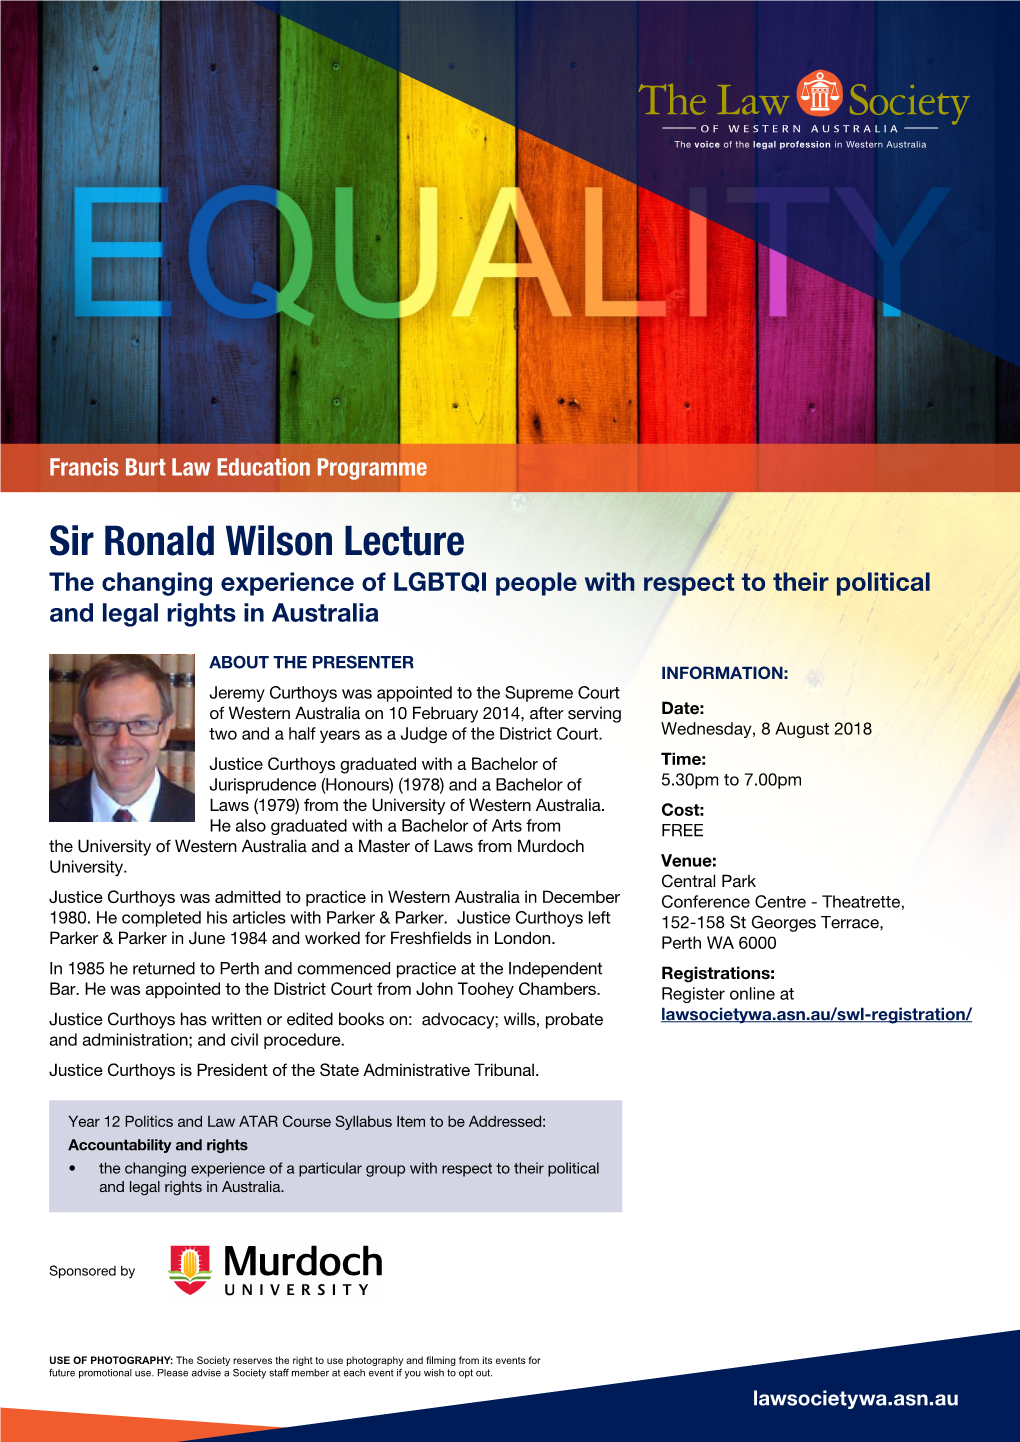 Sir Ronald Wilson Lecture the Changing Experience of LGBTQI People with Respect to Their Political and Legal Rights in Australia